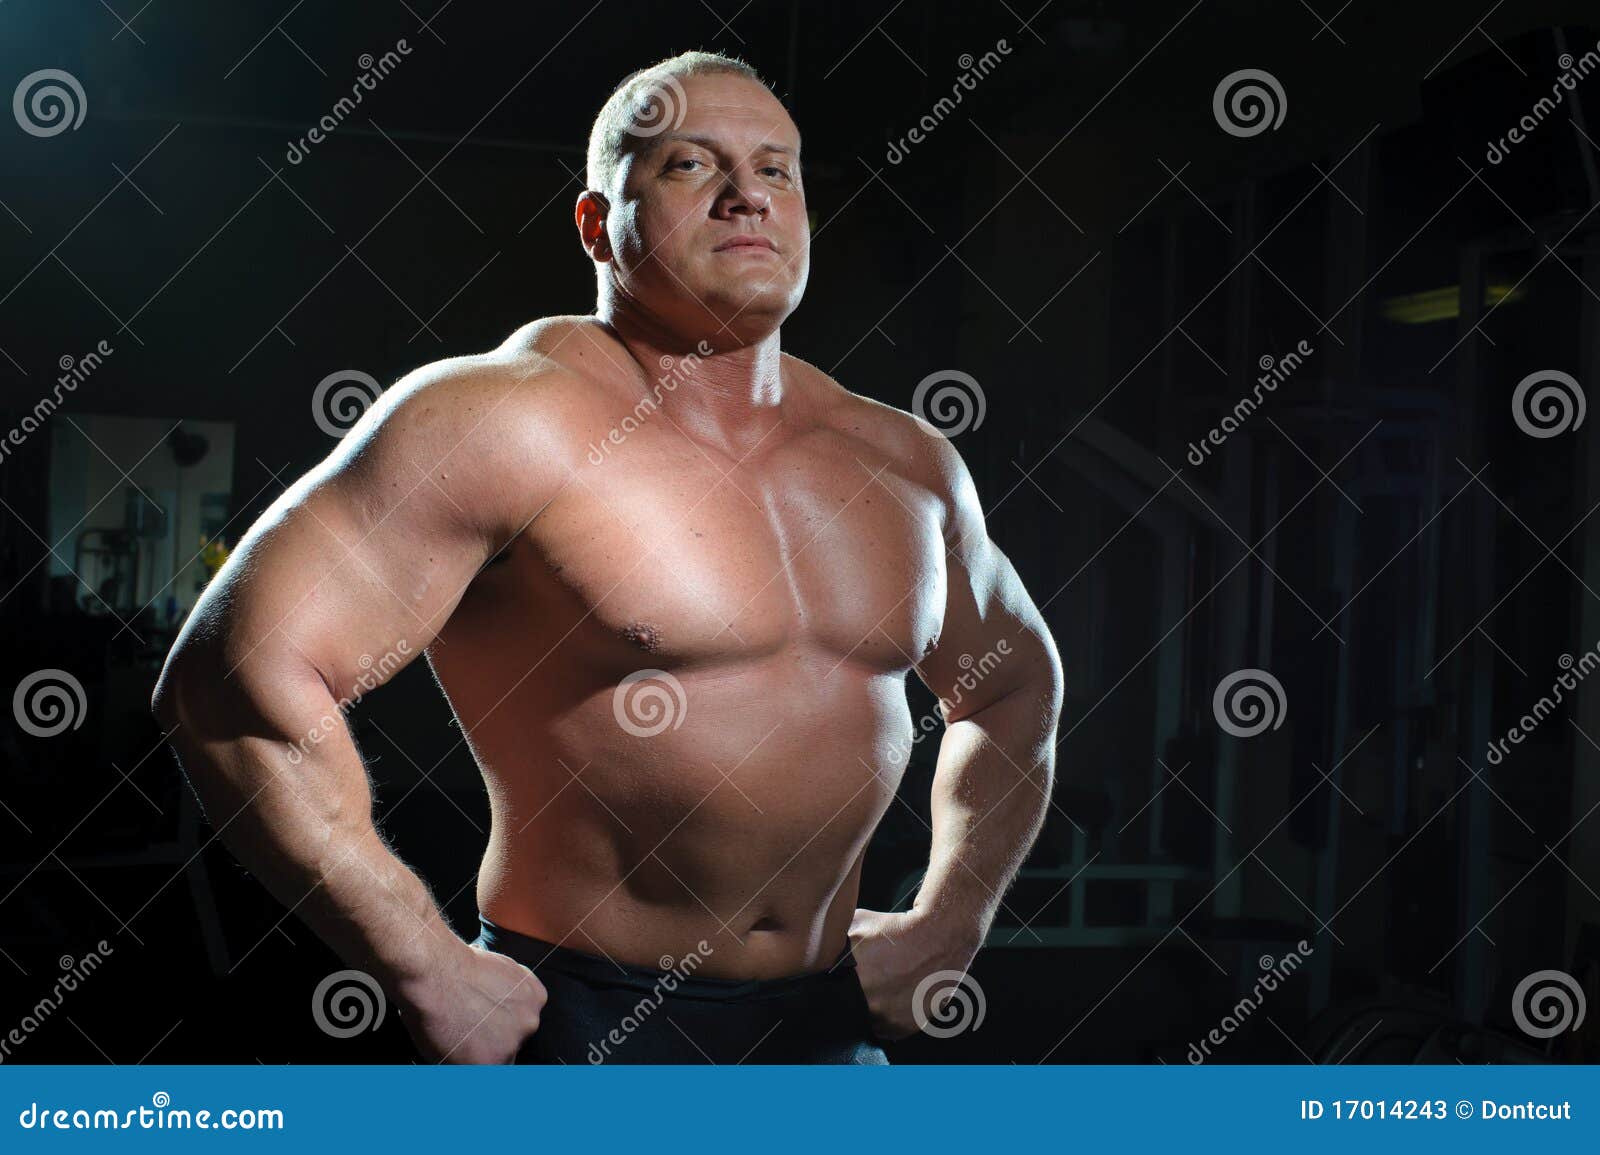 754 Bulky Man Royalty-Free Images, Stock Photos & Pictures